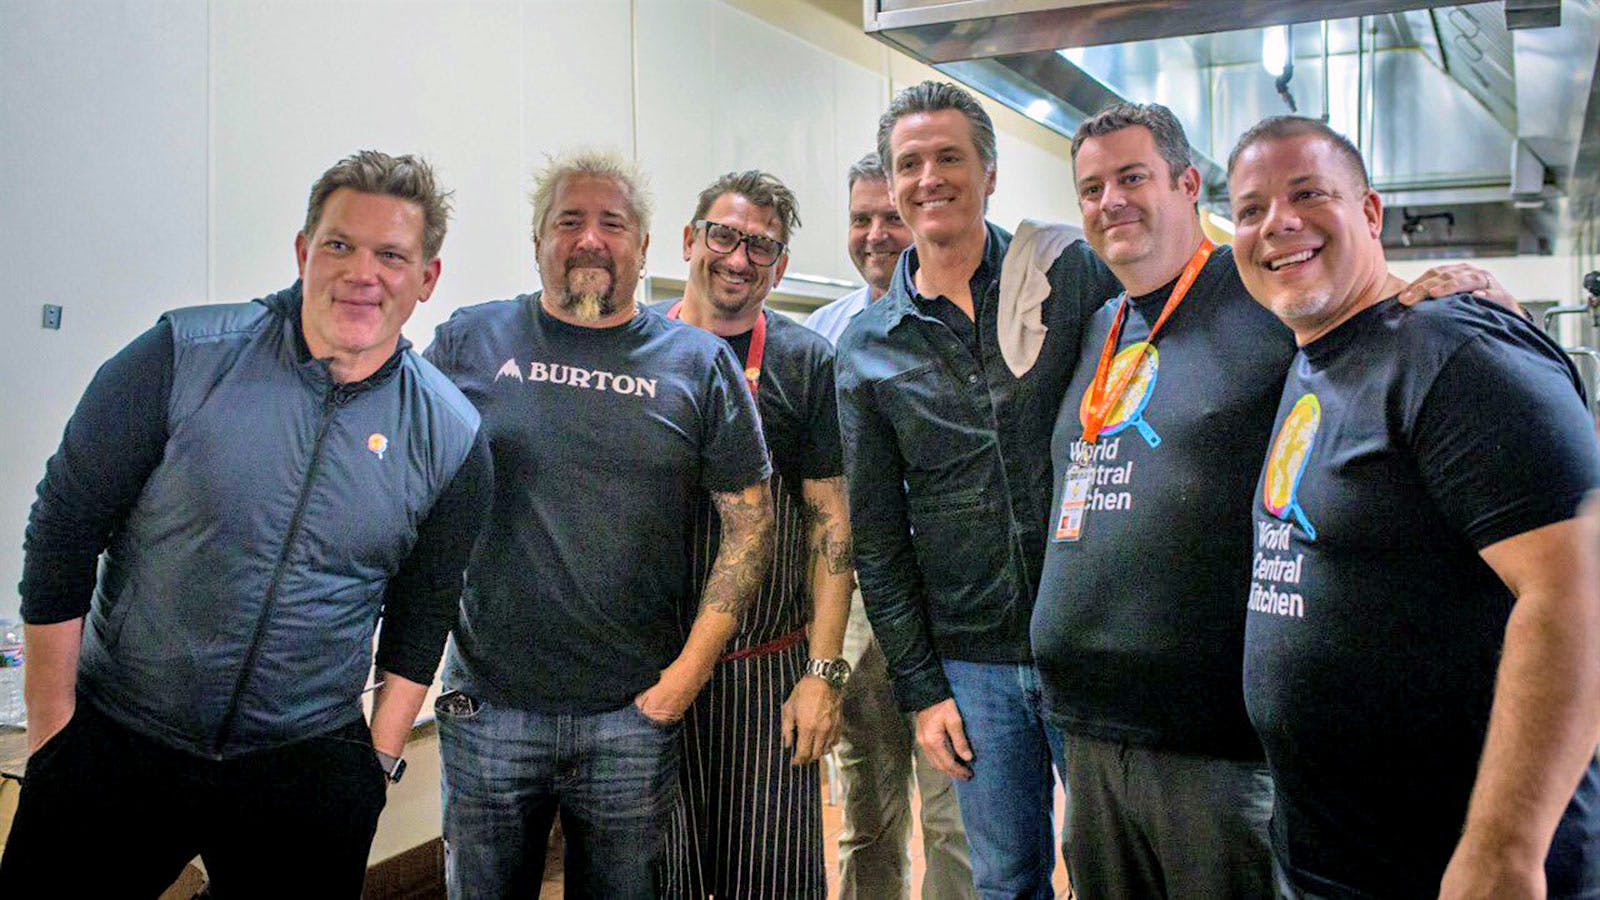 Star Chefs Assemble Super-Team to Feed California Fire Victims